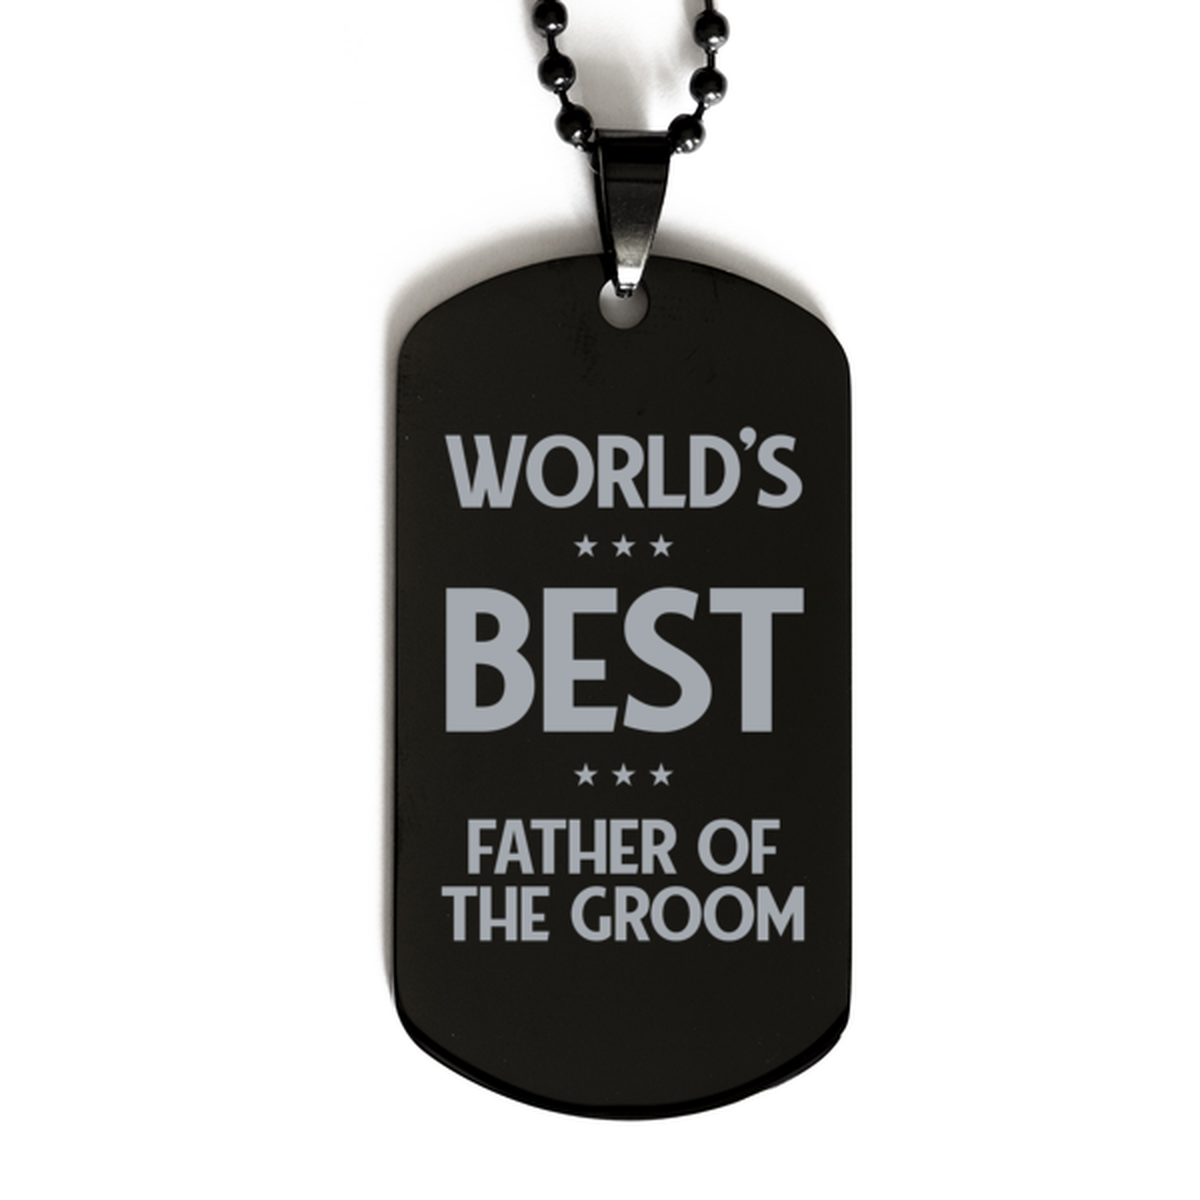 Worlds Best Father of the groom Gifts, Funny Black Engraved Dog Tag For Father of the groom, Birthday Presents For Men